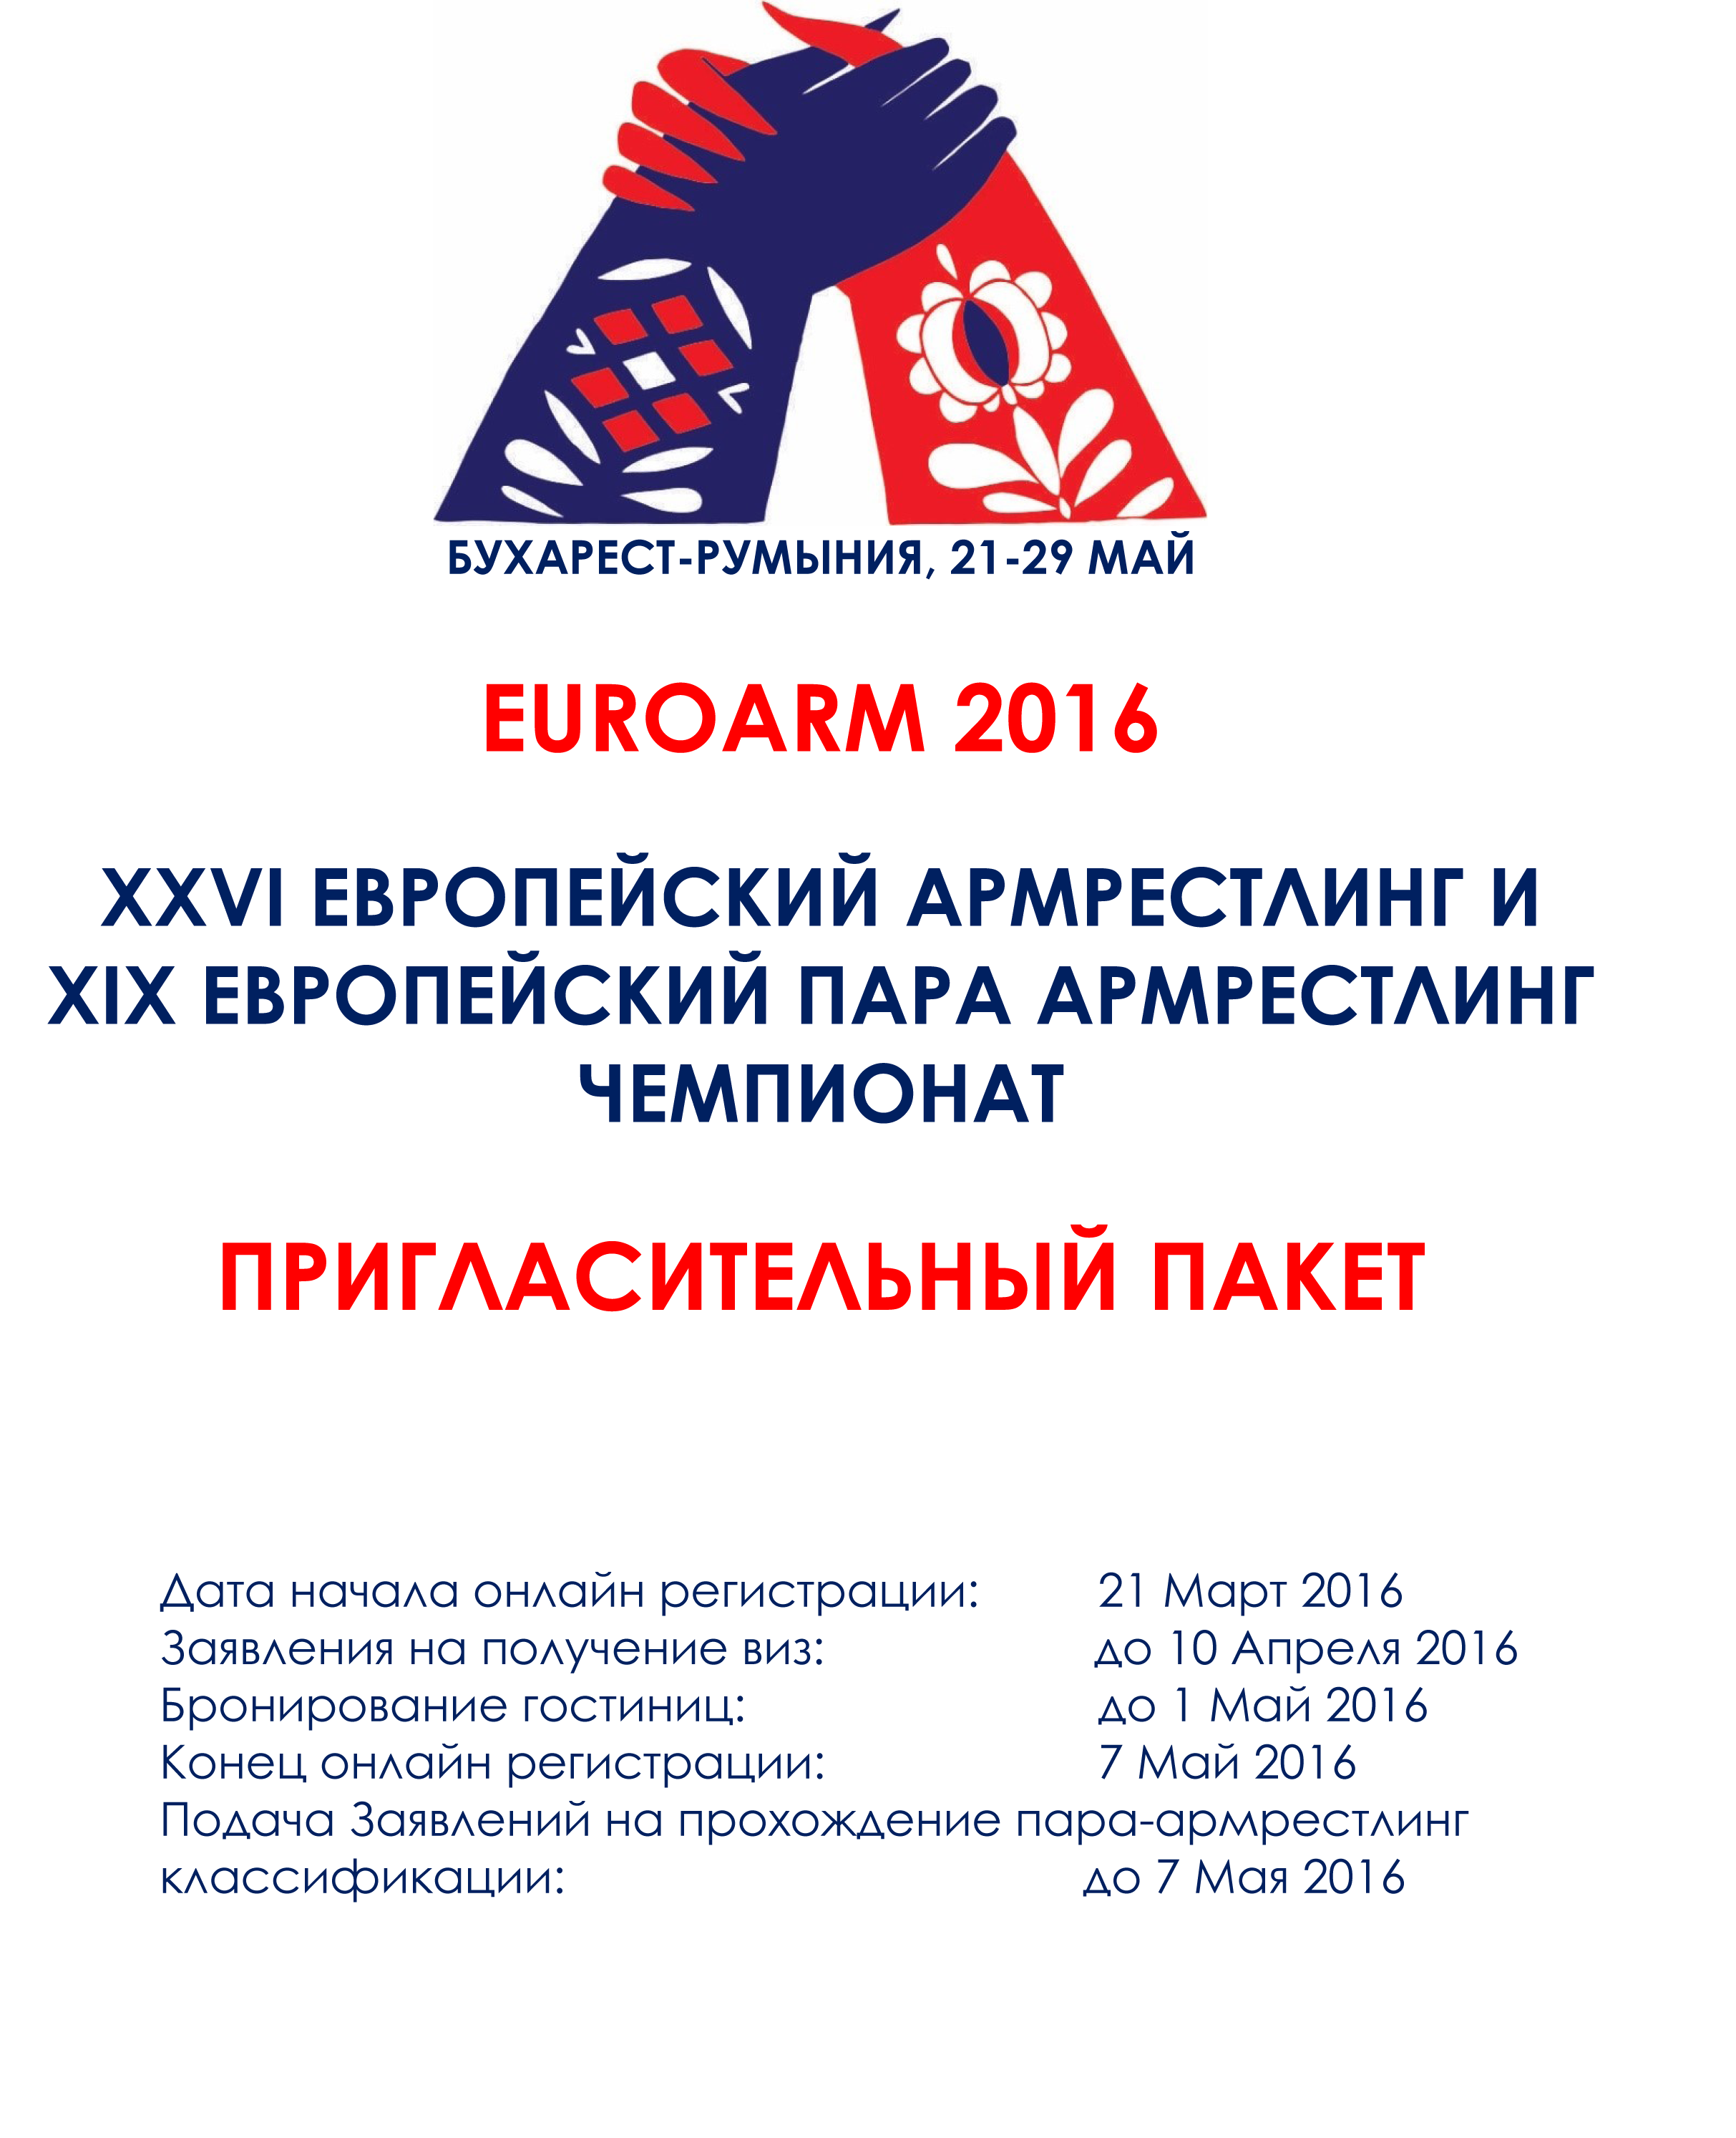 9f45d3_euroarm-2016-packages-rus-1.png